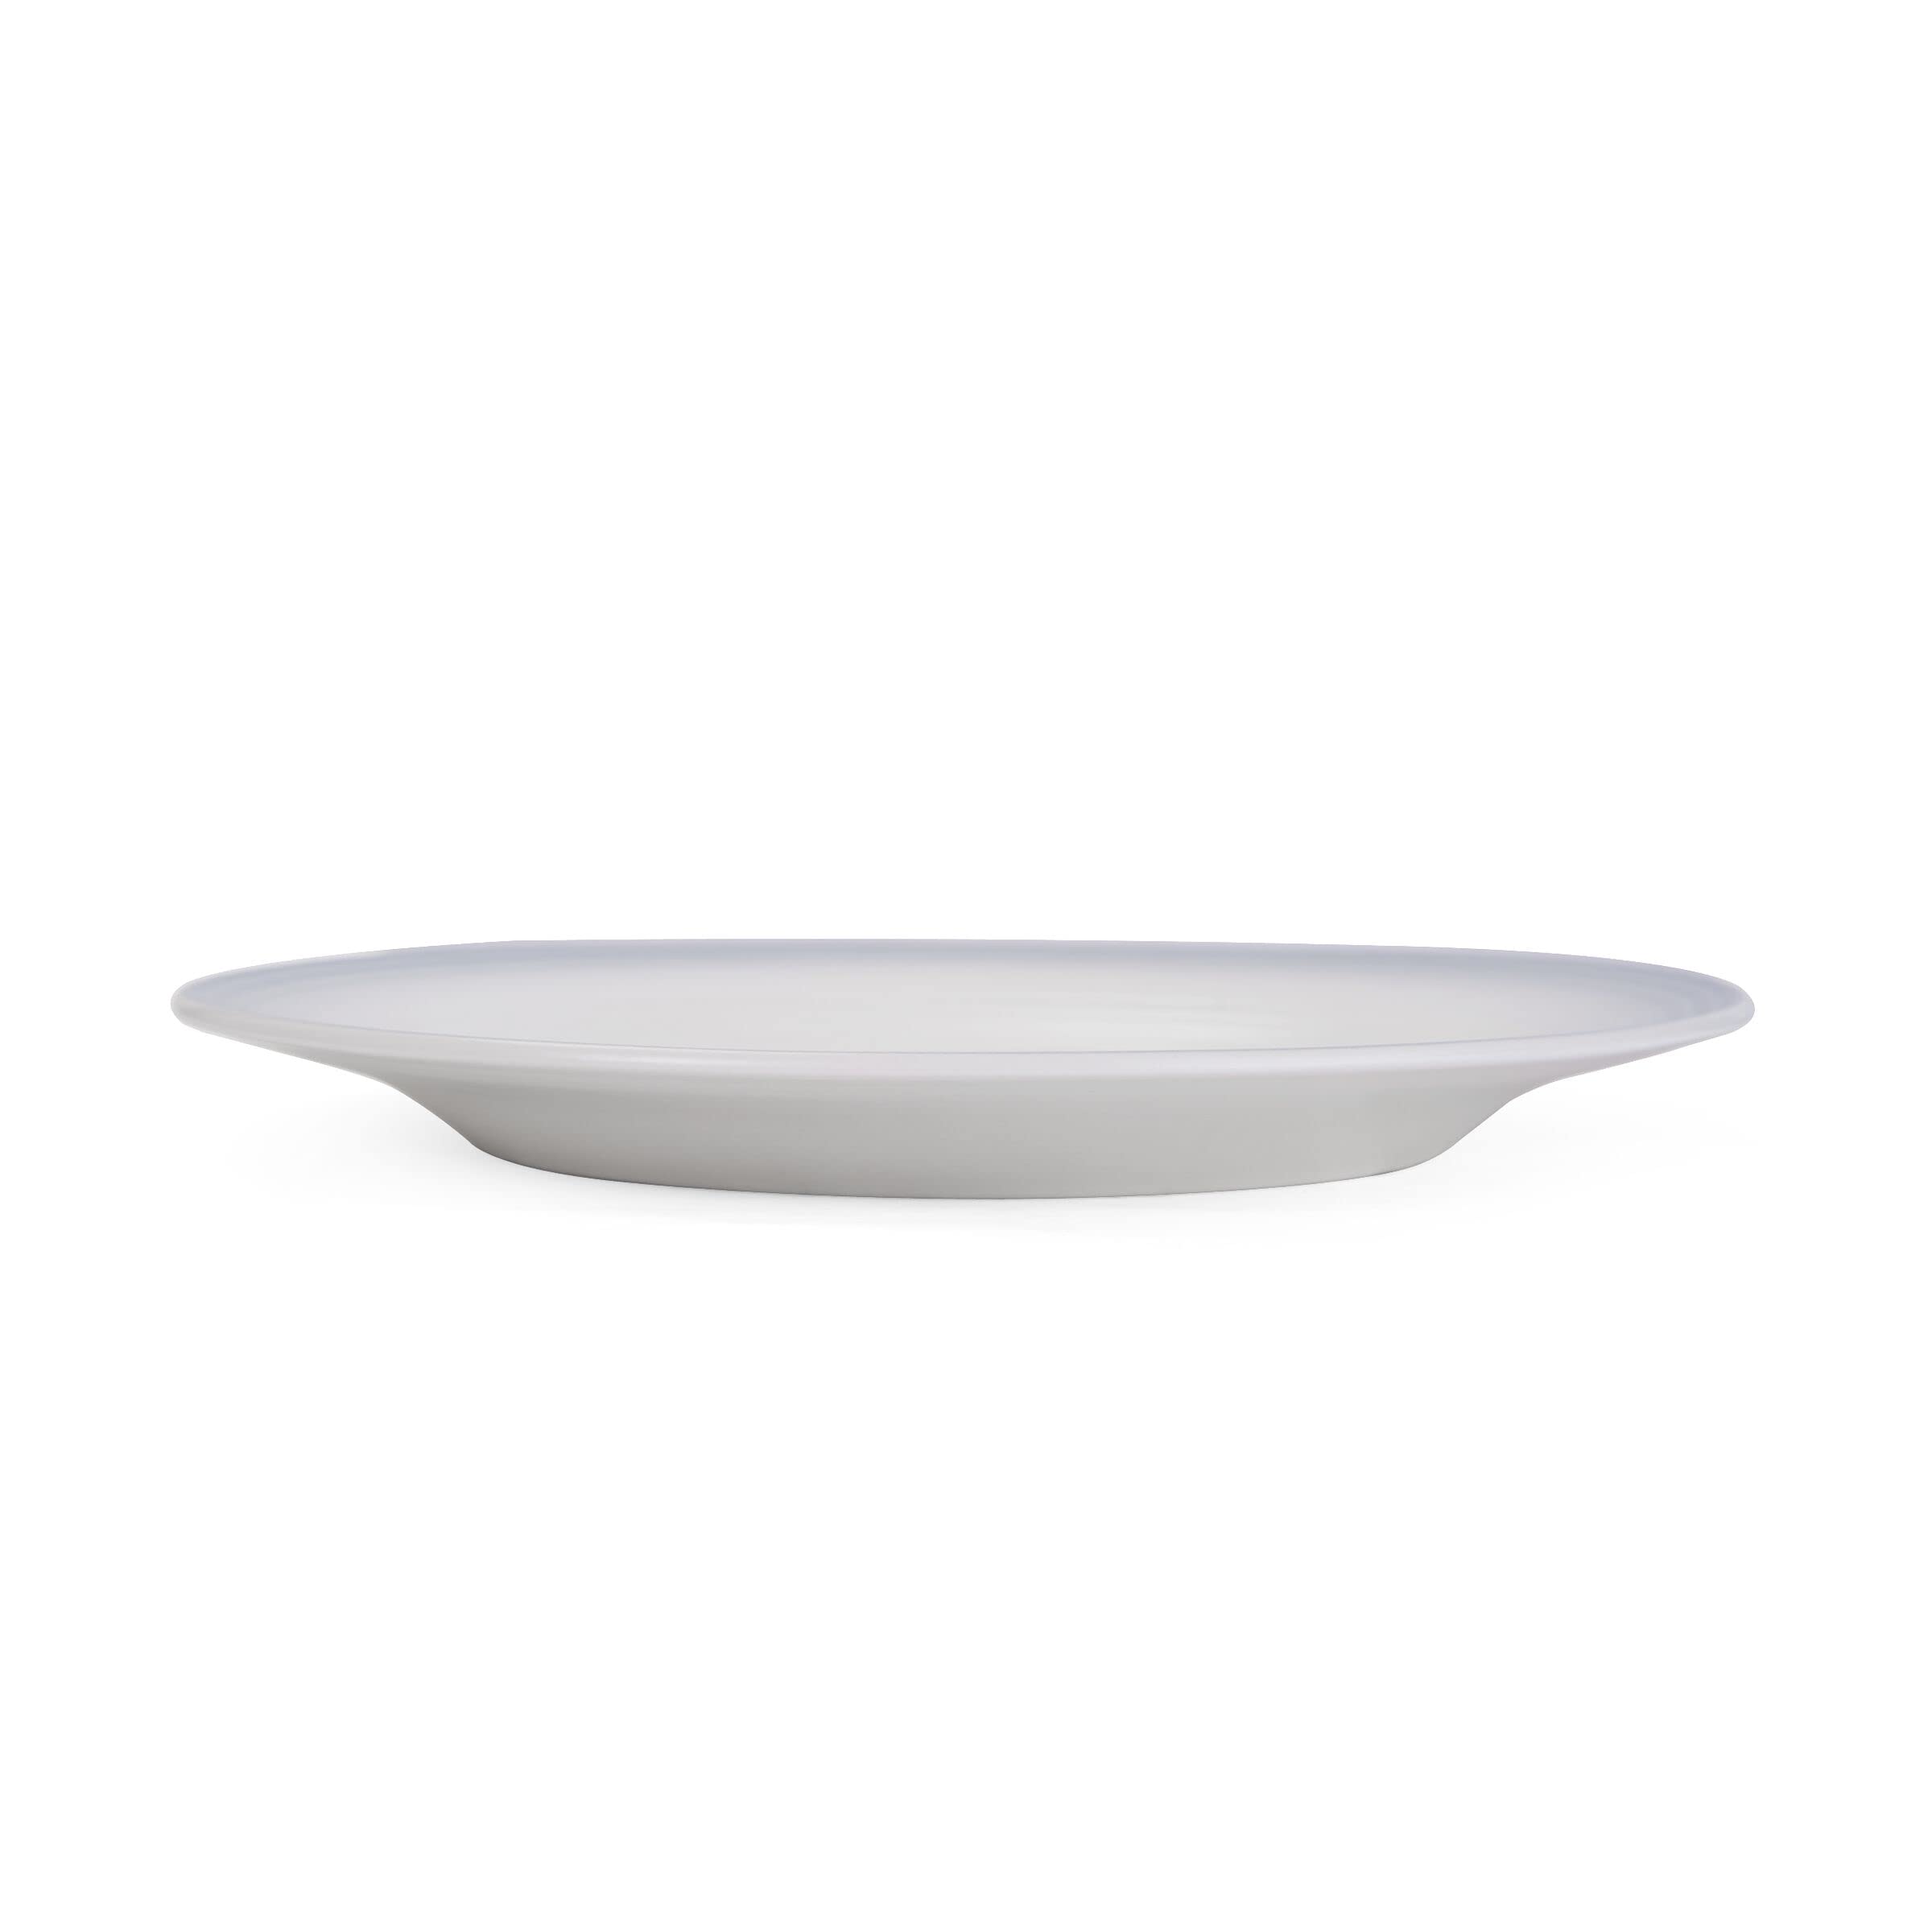 Mikasa Swirl Ombre White Round Platter, 12.5 Inch, Grey Banded